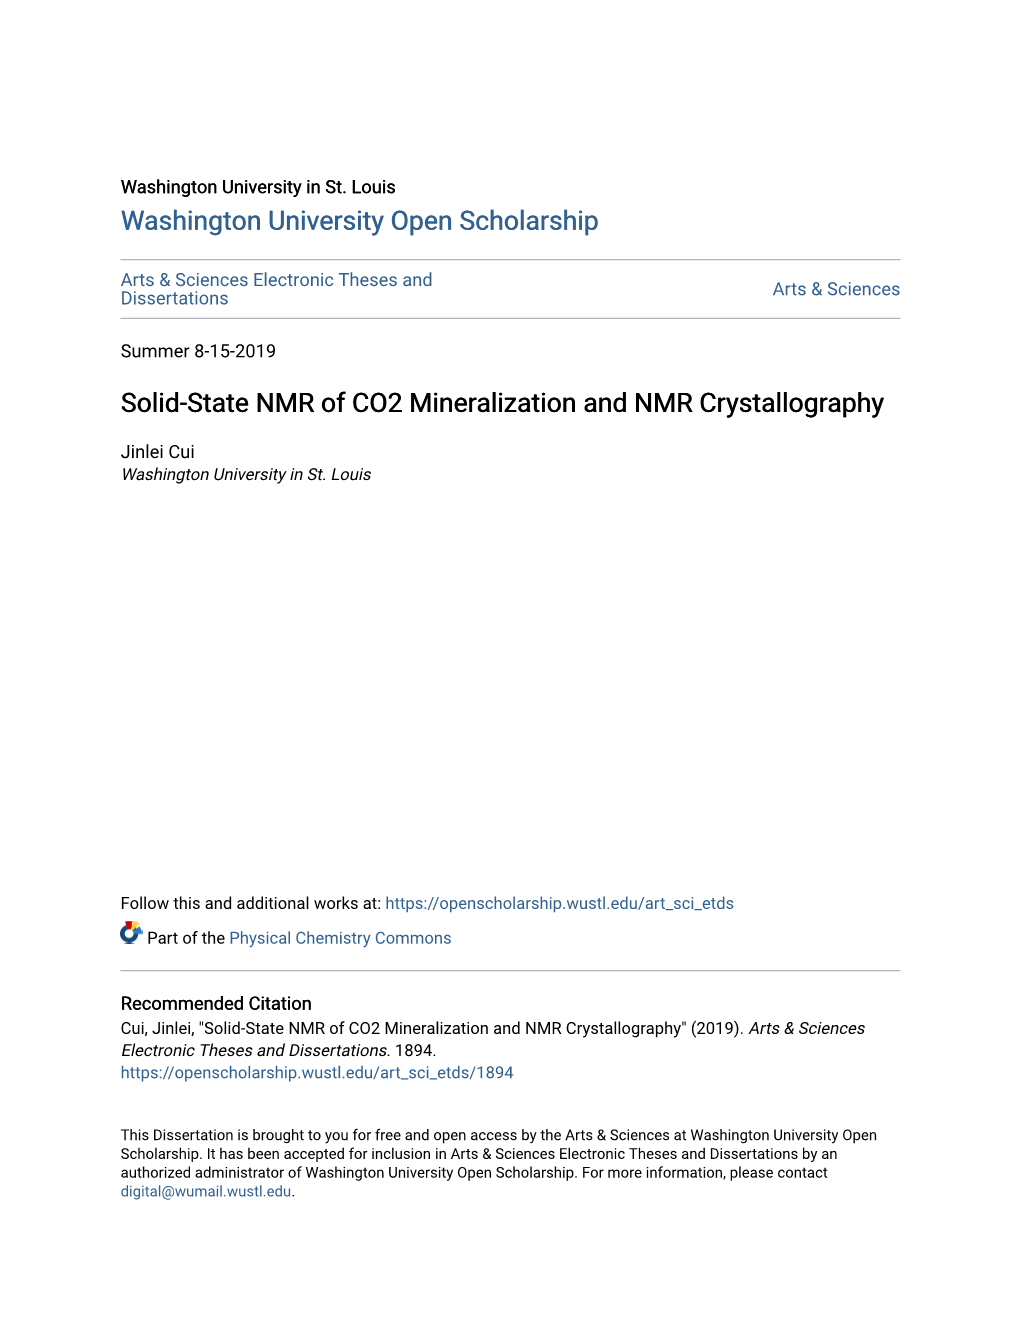 Solid-State NMR of CO2 Mineralization and NMR Crystallography